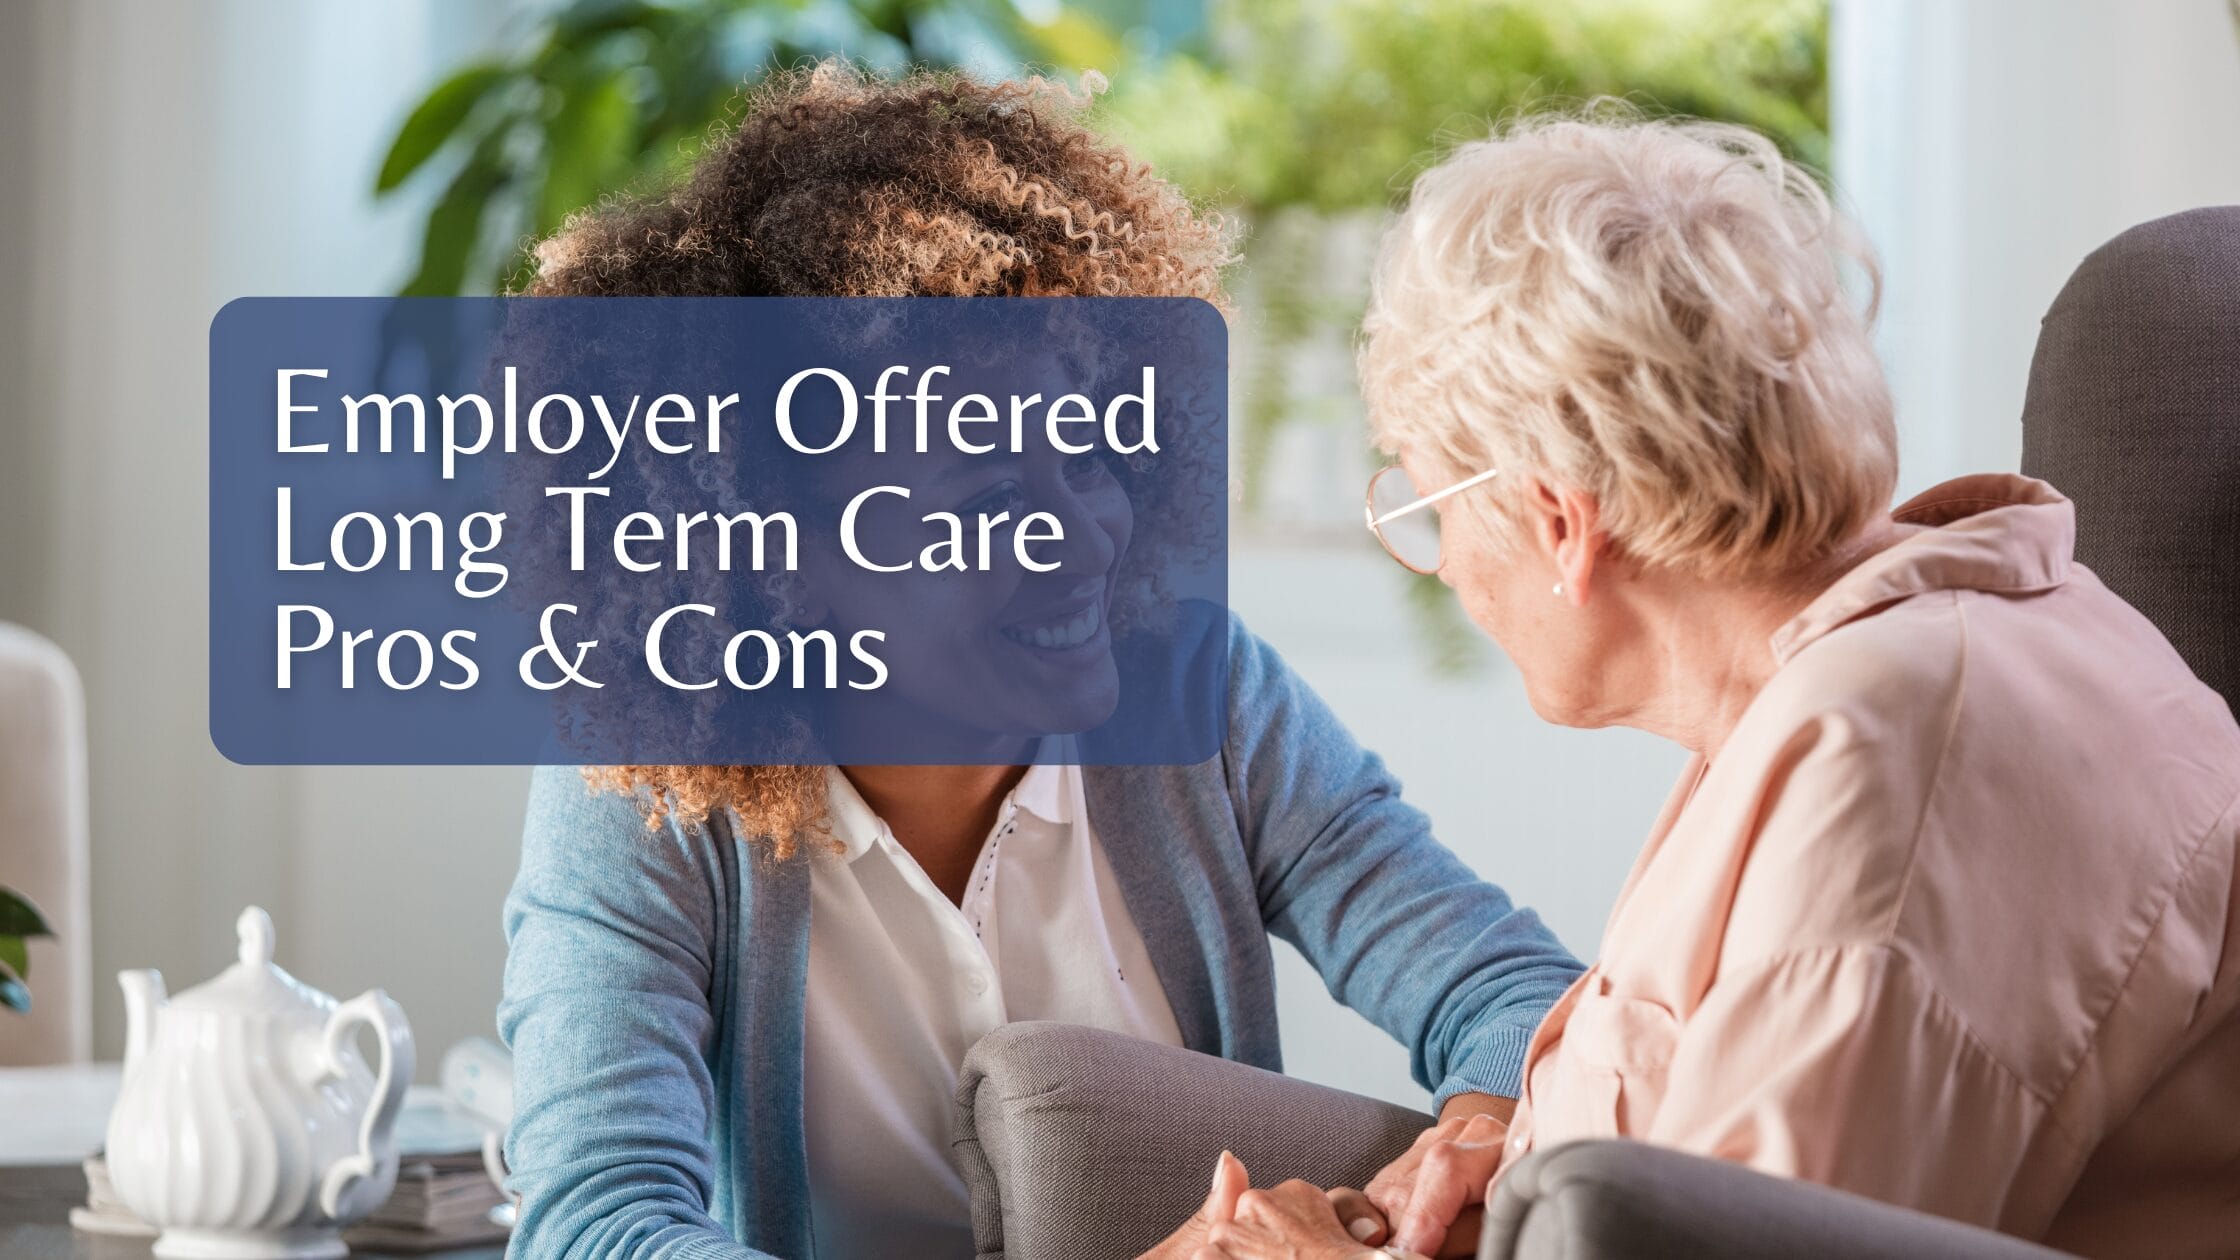 Employer Offered Long Term Care Pros & Cons